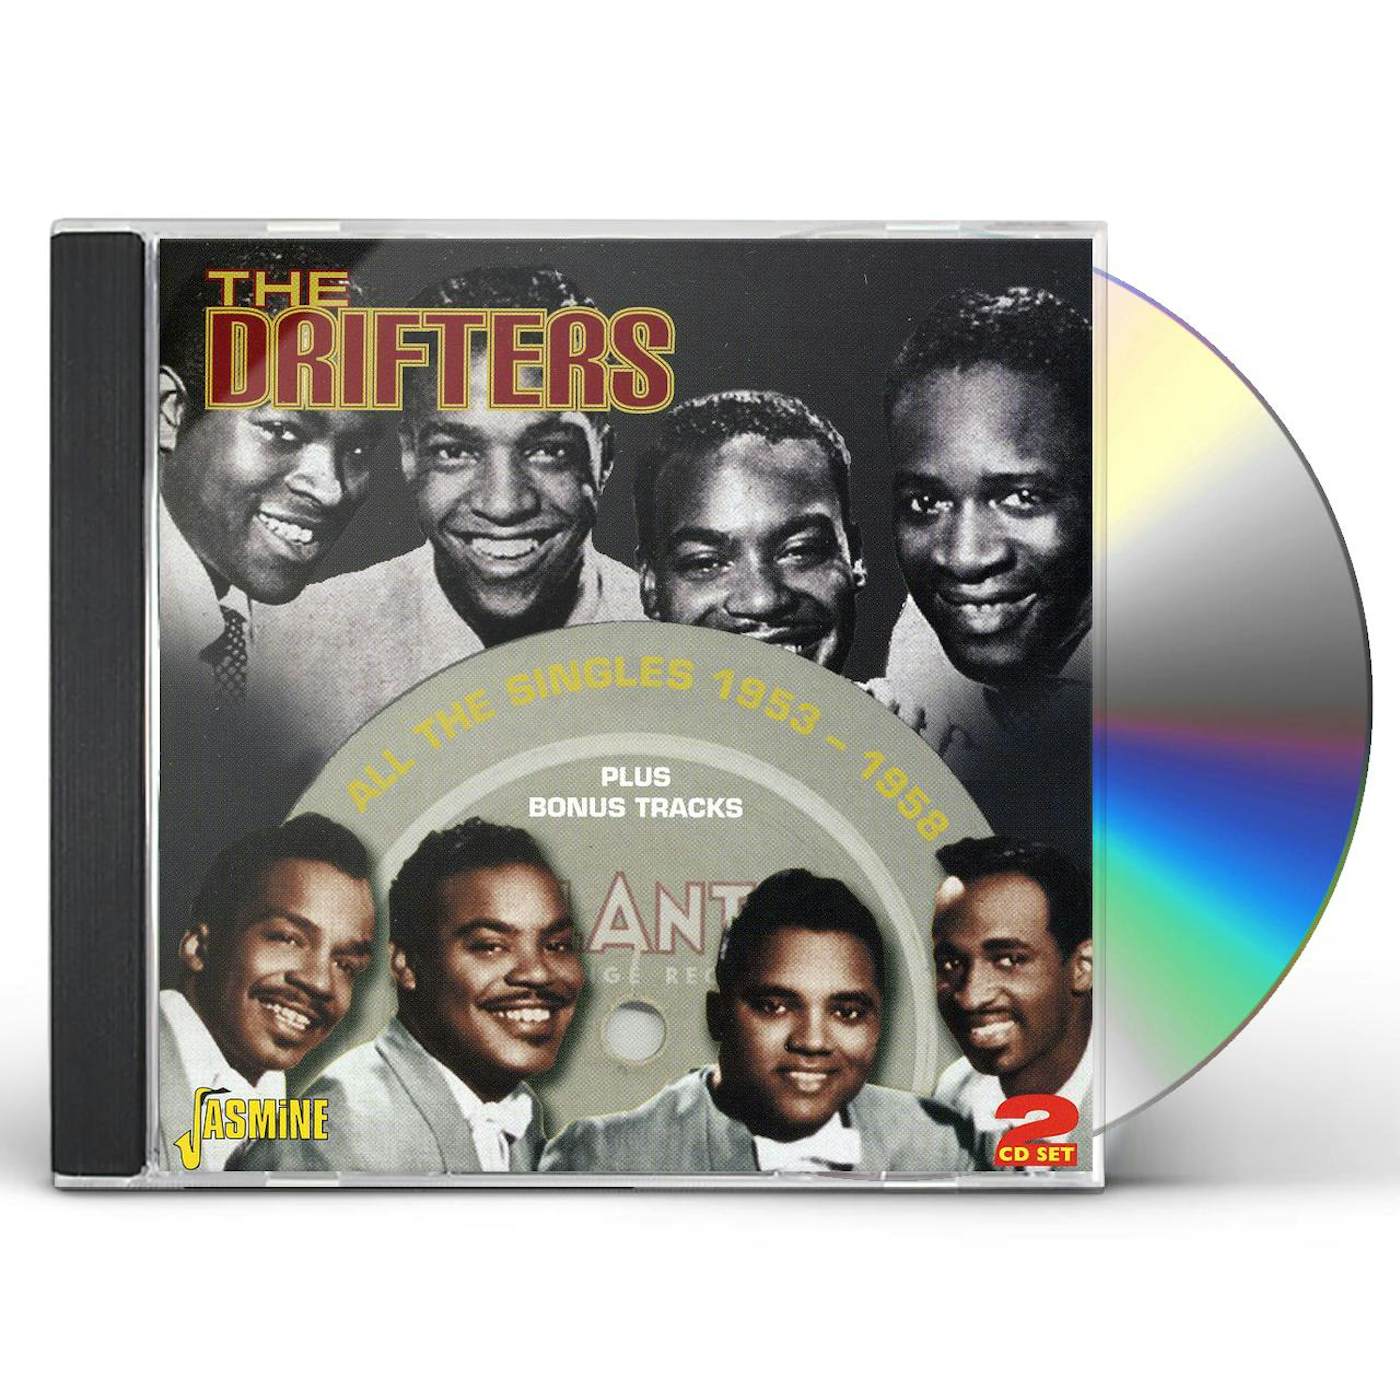 The Drifters ALL THE SINGLES 1953-58 CD